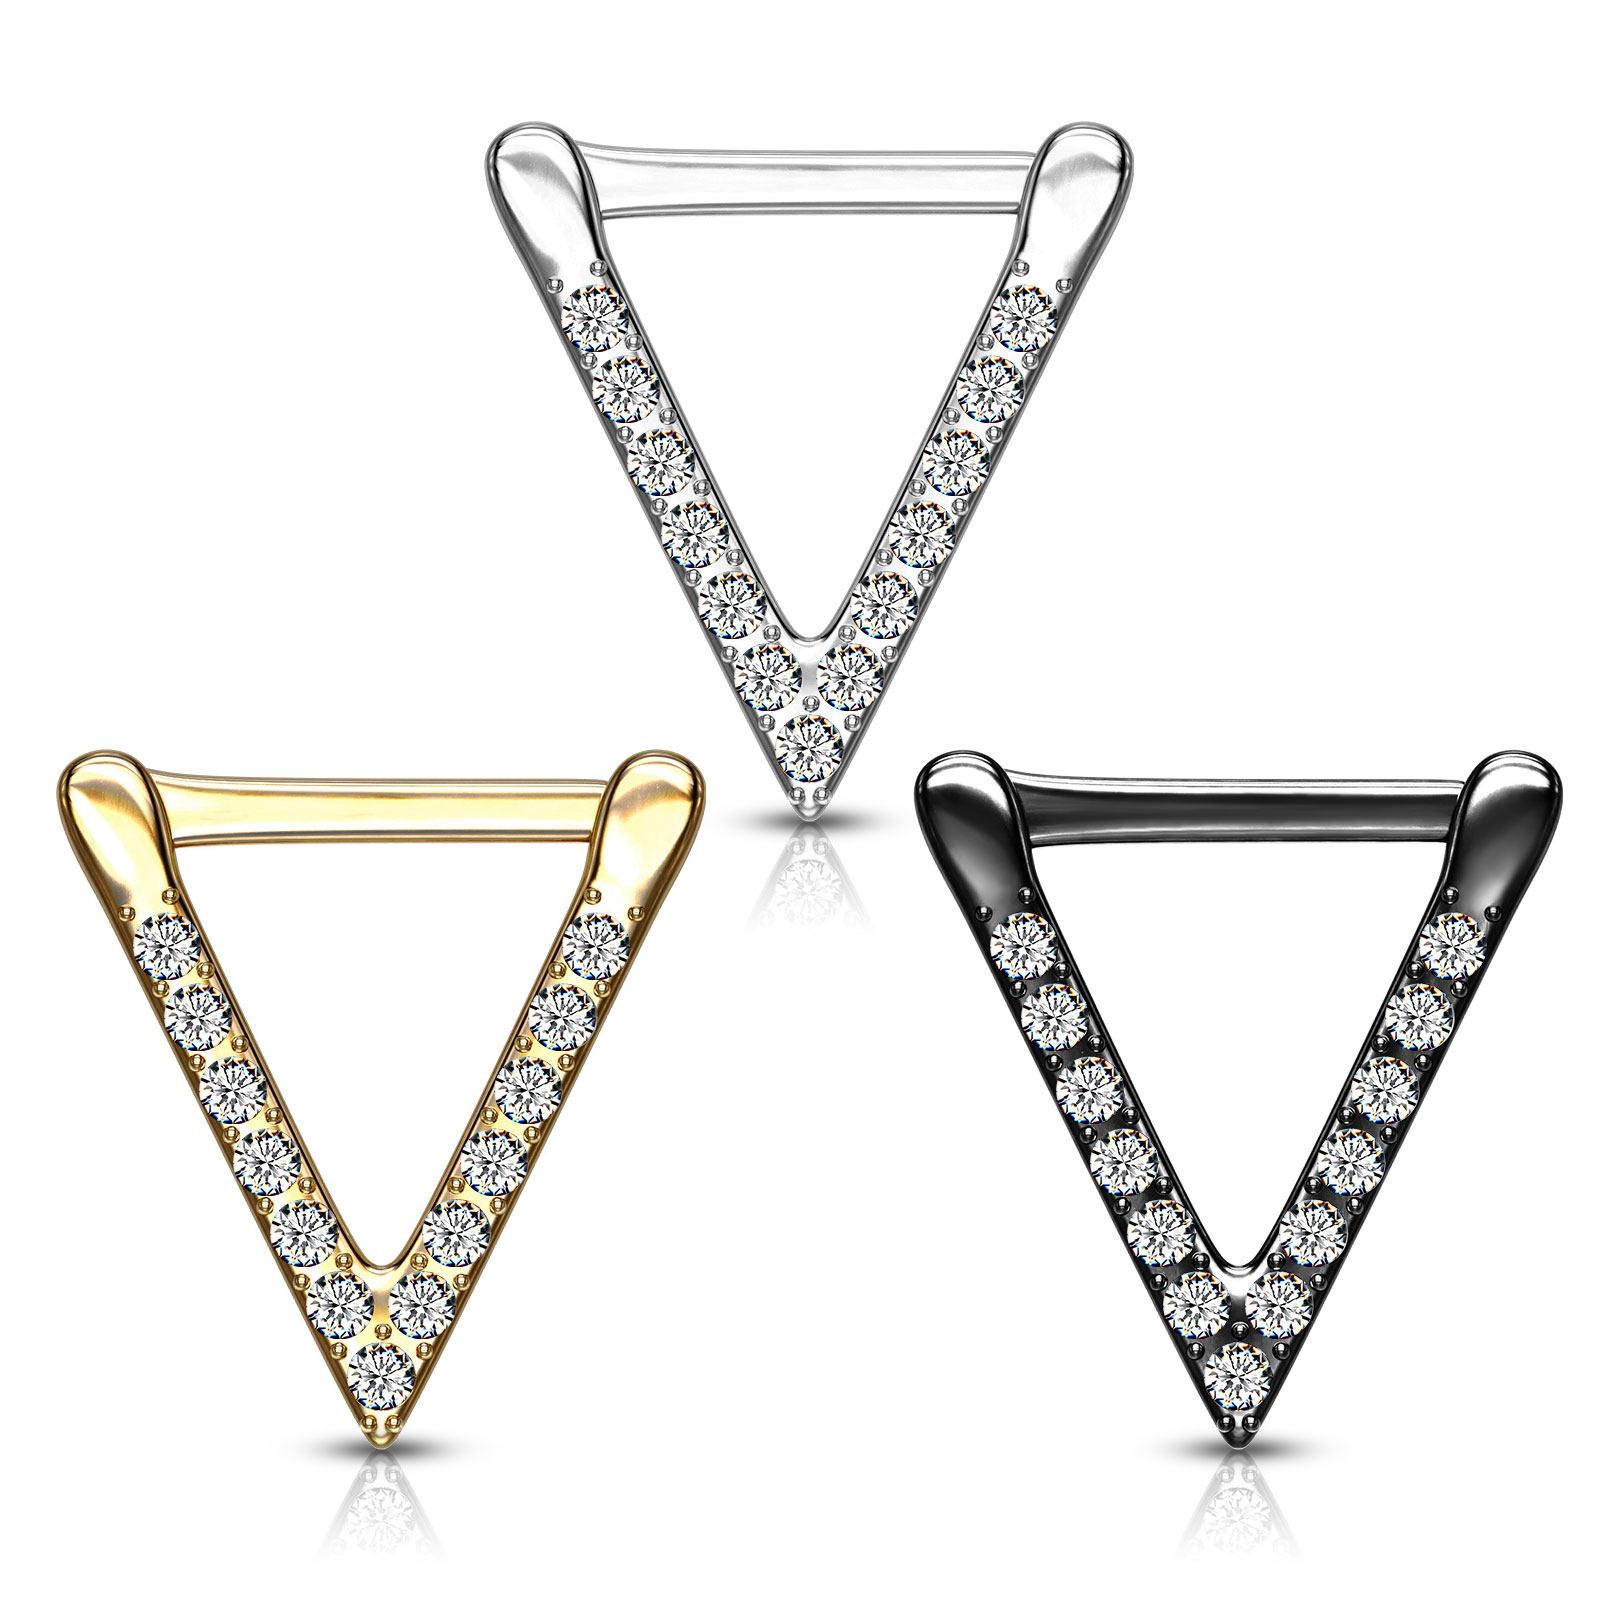 Septum clicker with paved triangle shape